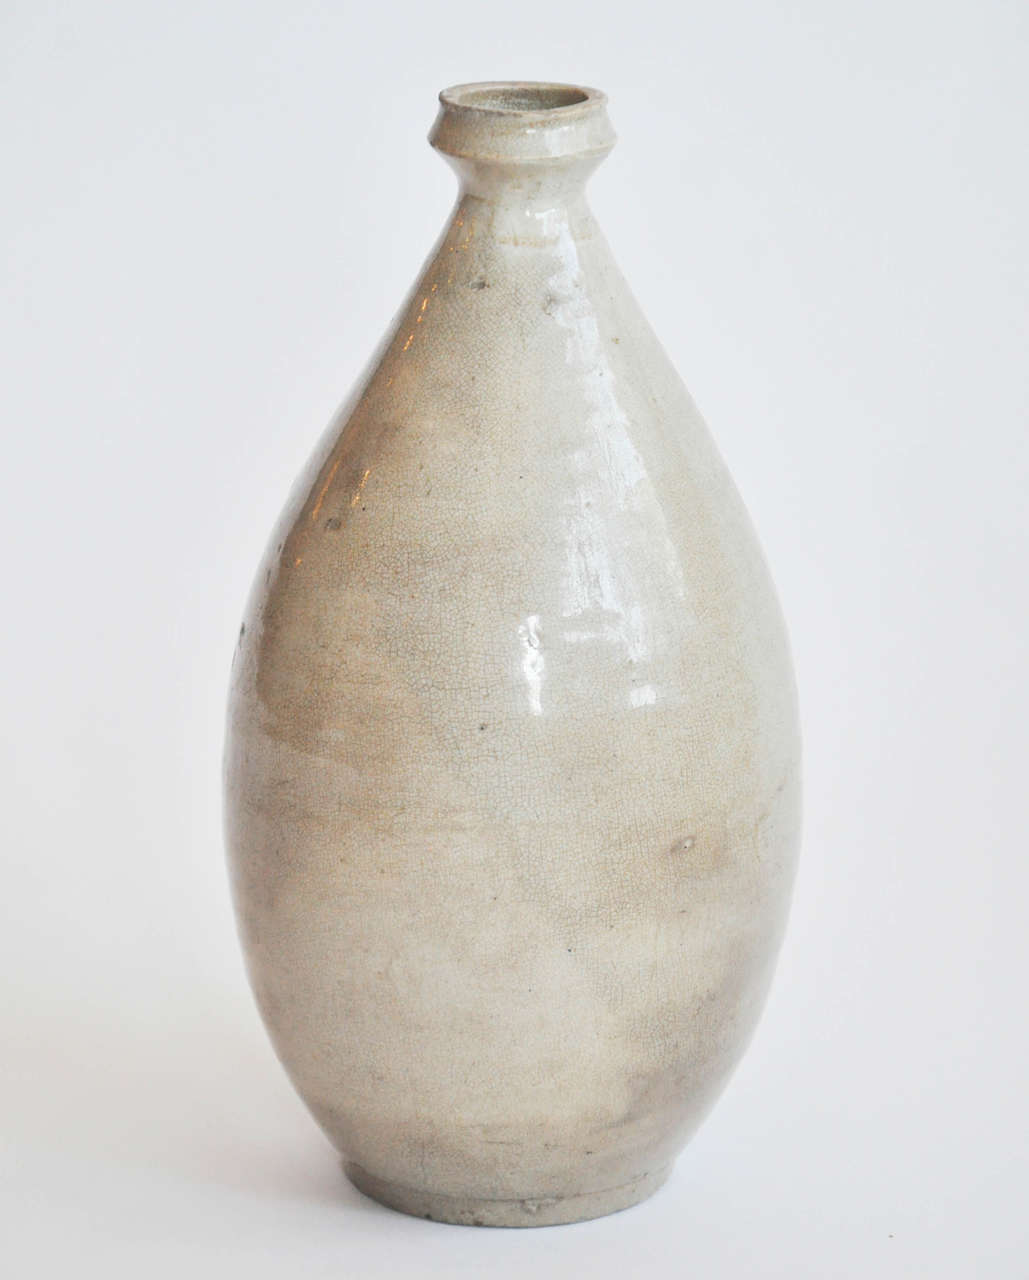 15th century crème glazed Korean bottle.
A large Korean buff glazed bottle early Yi-Dynasty 1392-1910.
A well potted bottle, done in the Goguryeo manner. A Fine buff crackle glaze with staining from long term use and burial.
Beautiful